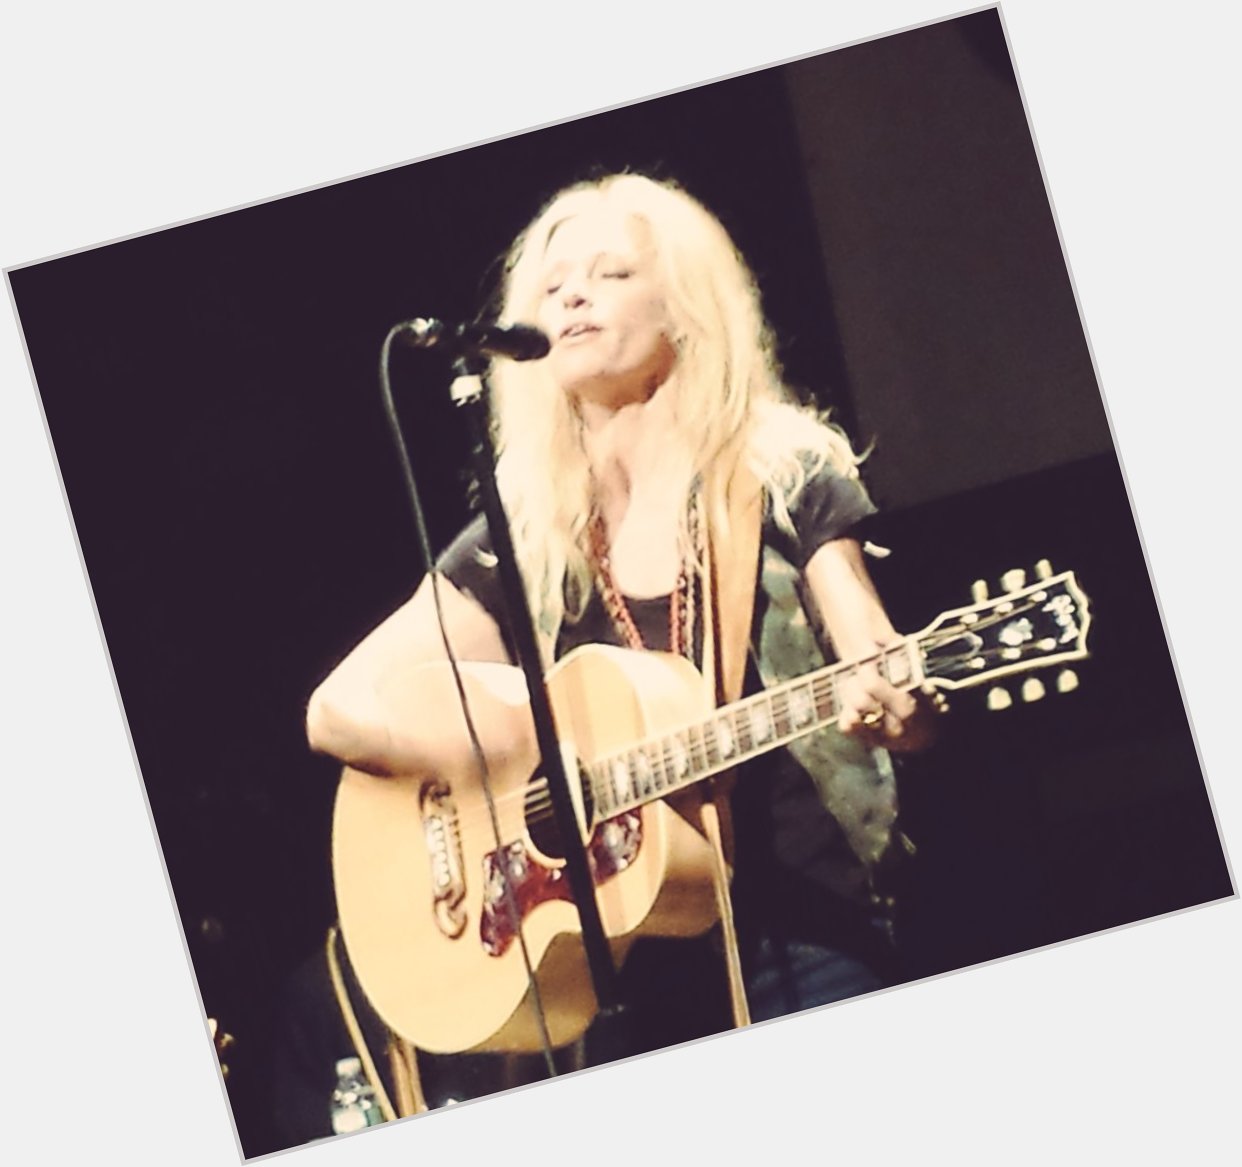  Heard a beautiful set of Shelby Lynne songs today on wishing her a Happy Birthday. 